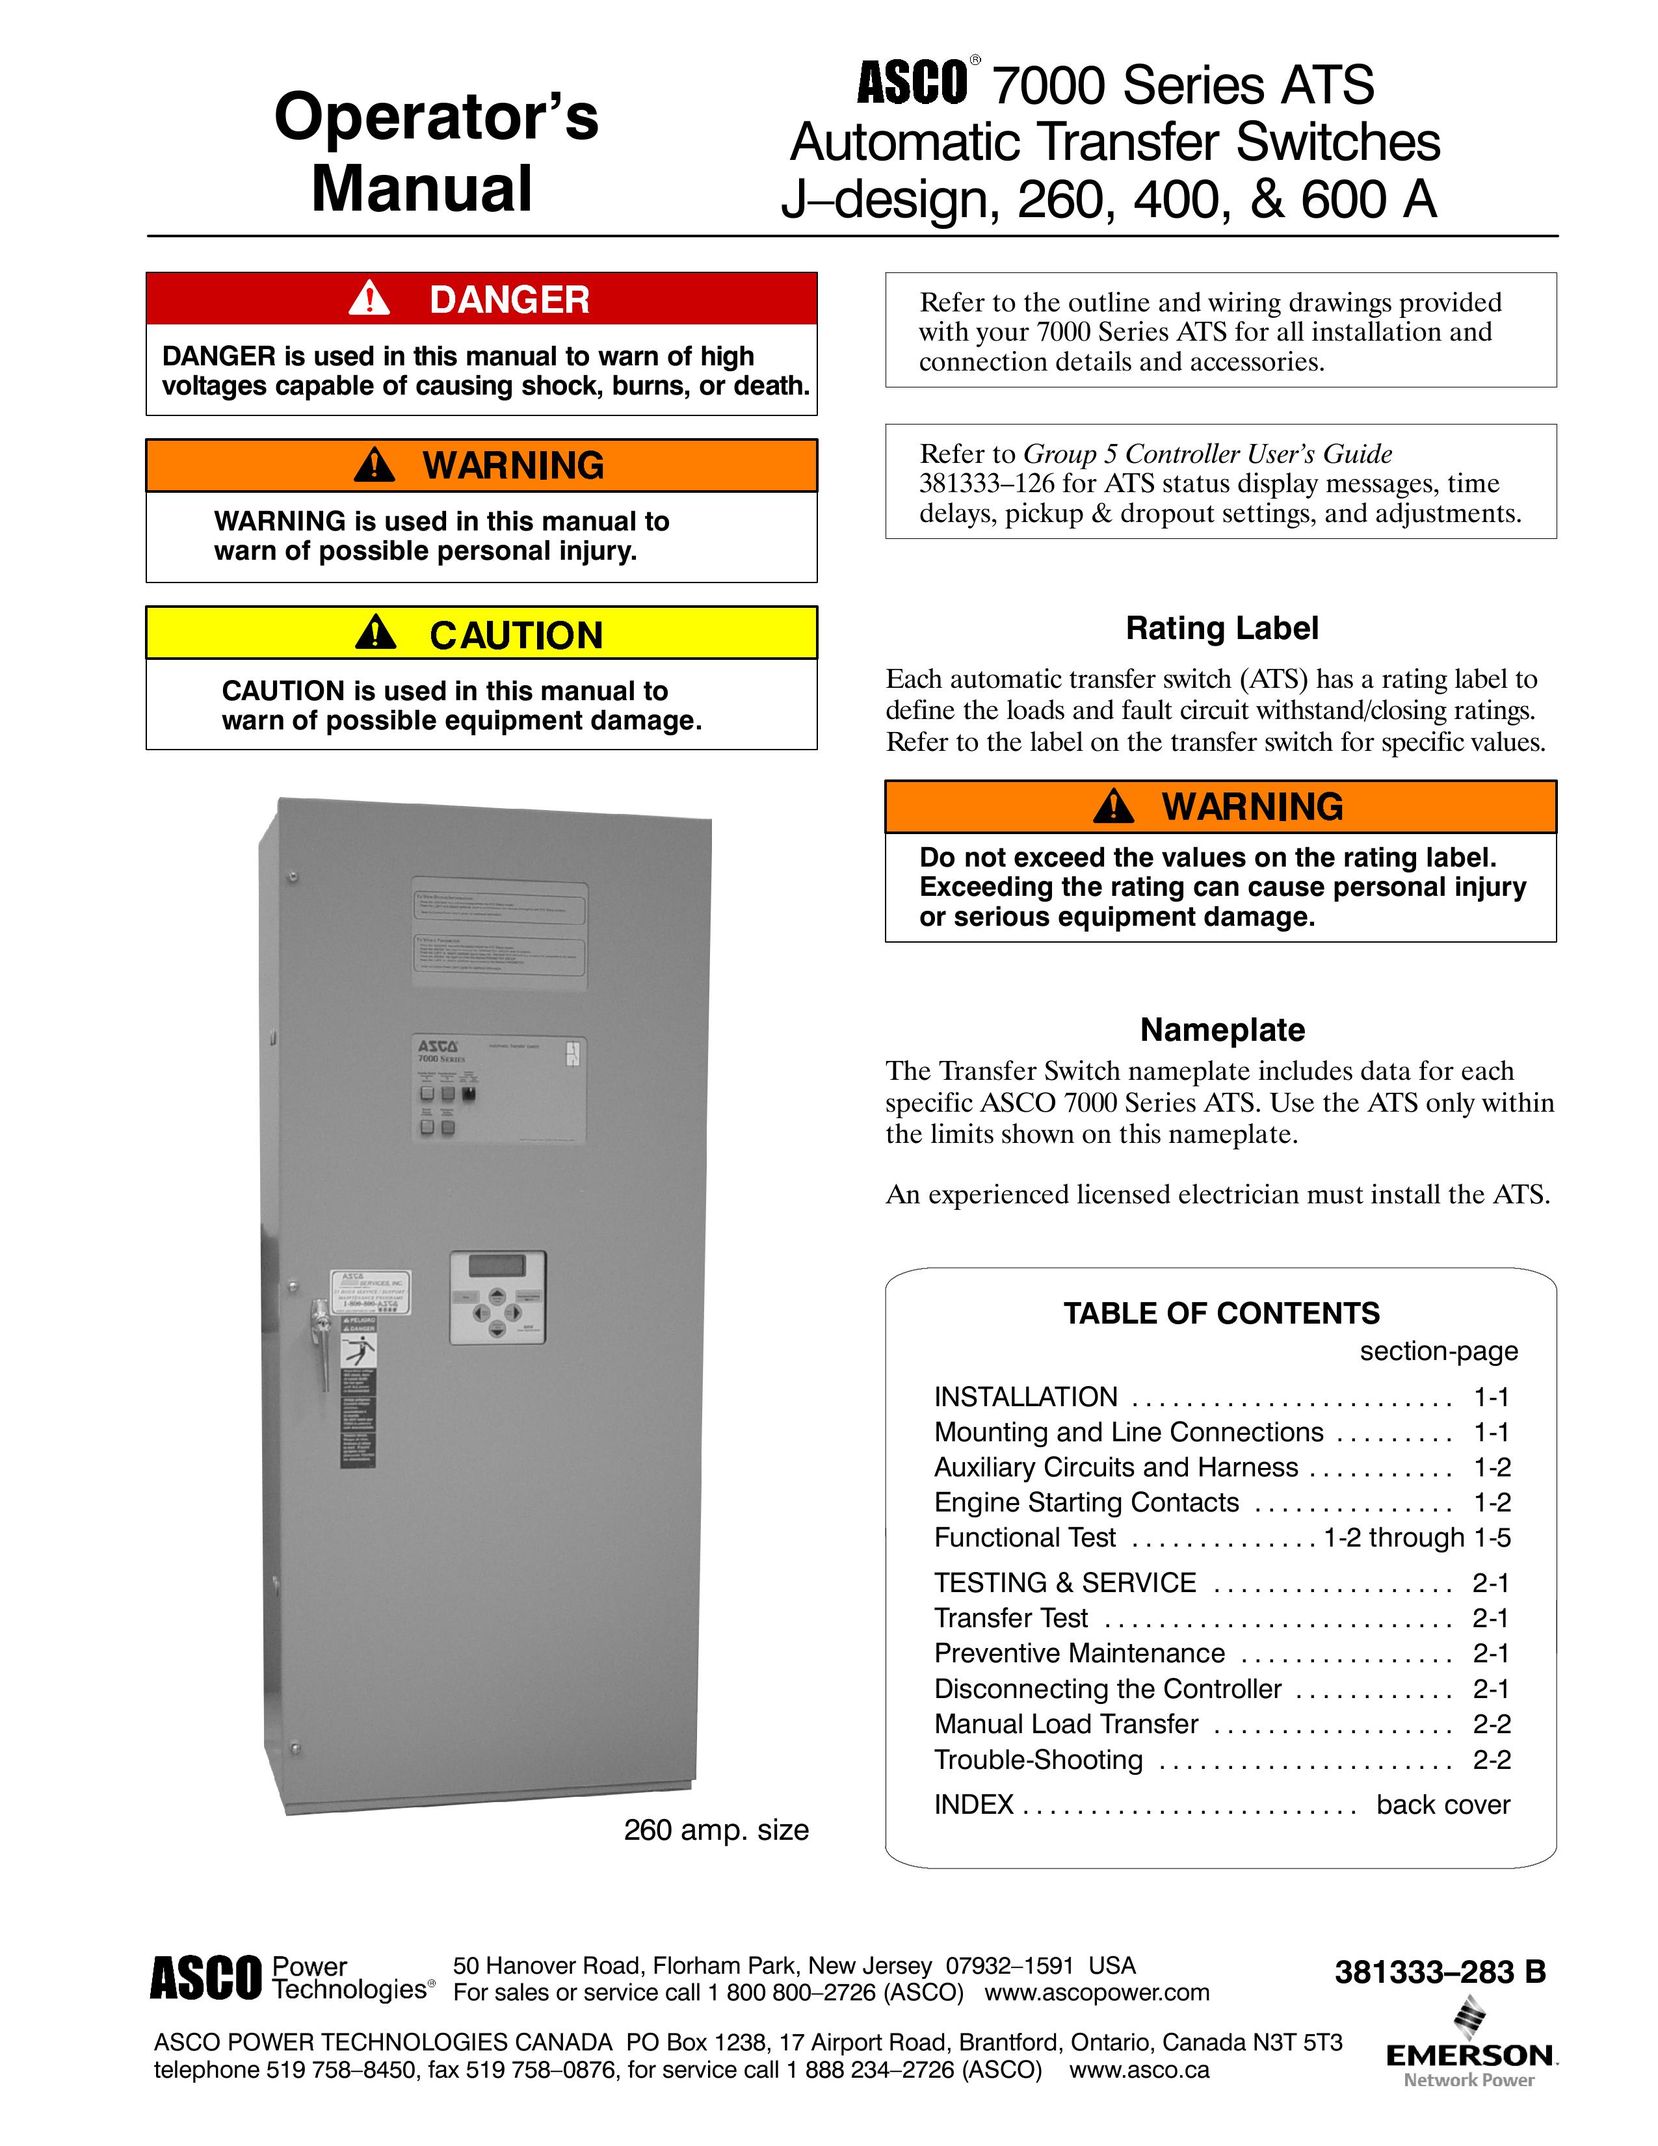 Emerson 600 A Switch User Manual